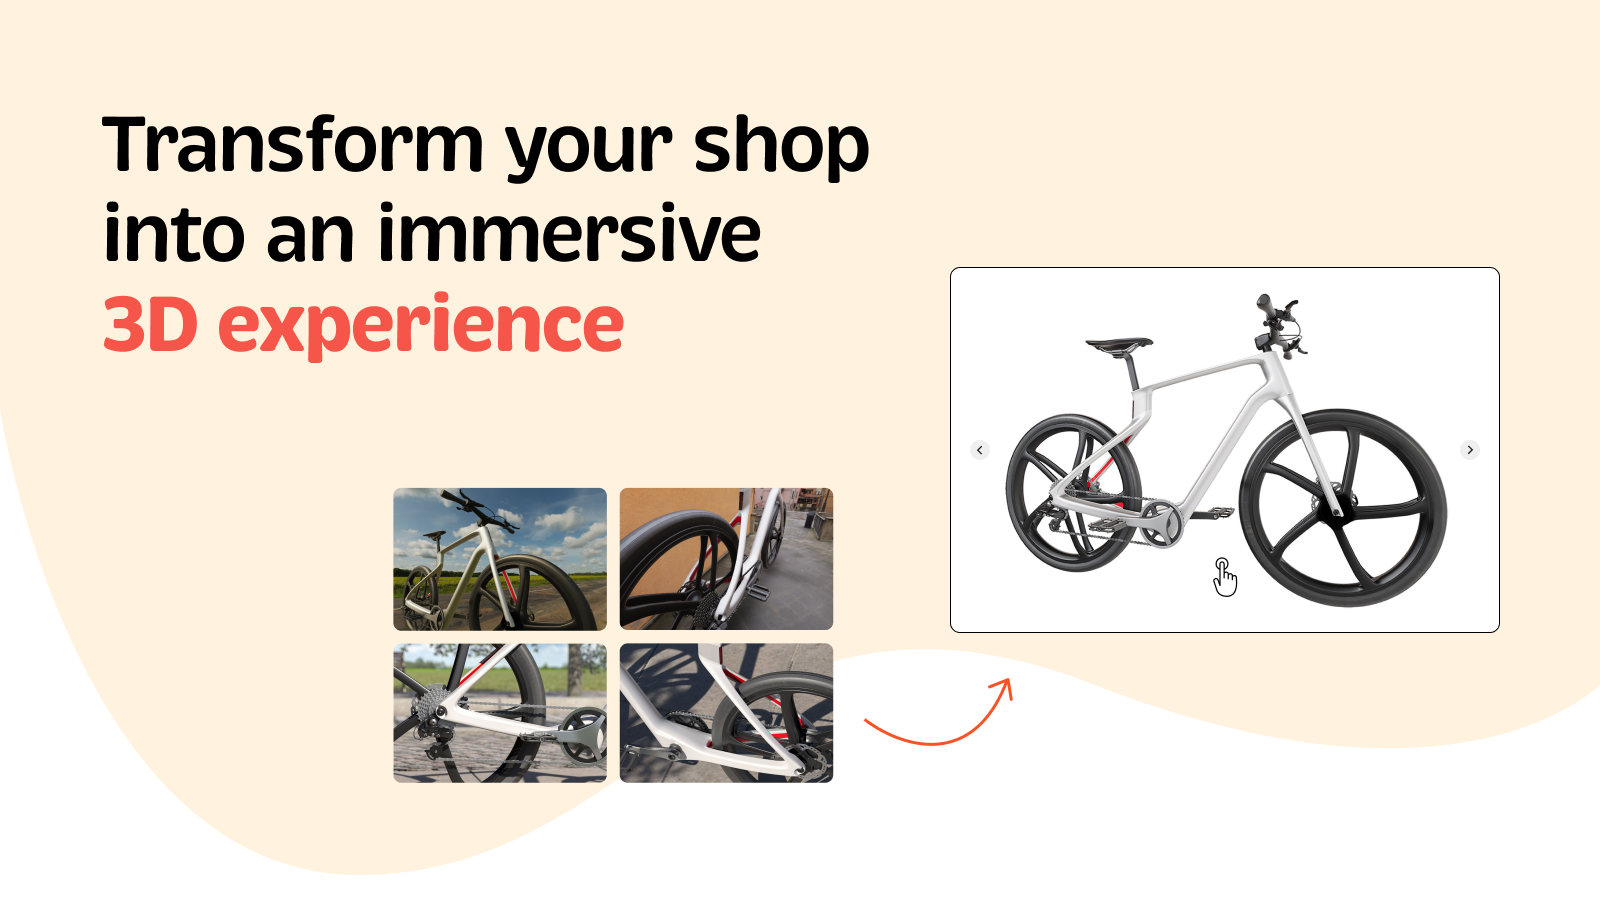 Transform your shop into an immersive experience